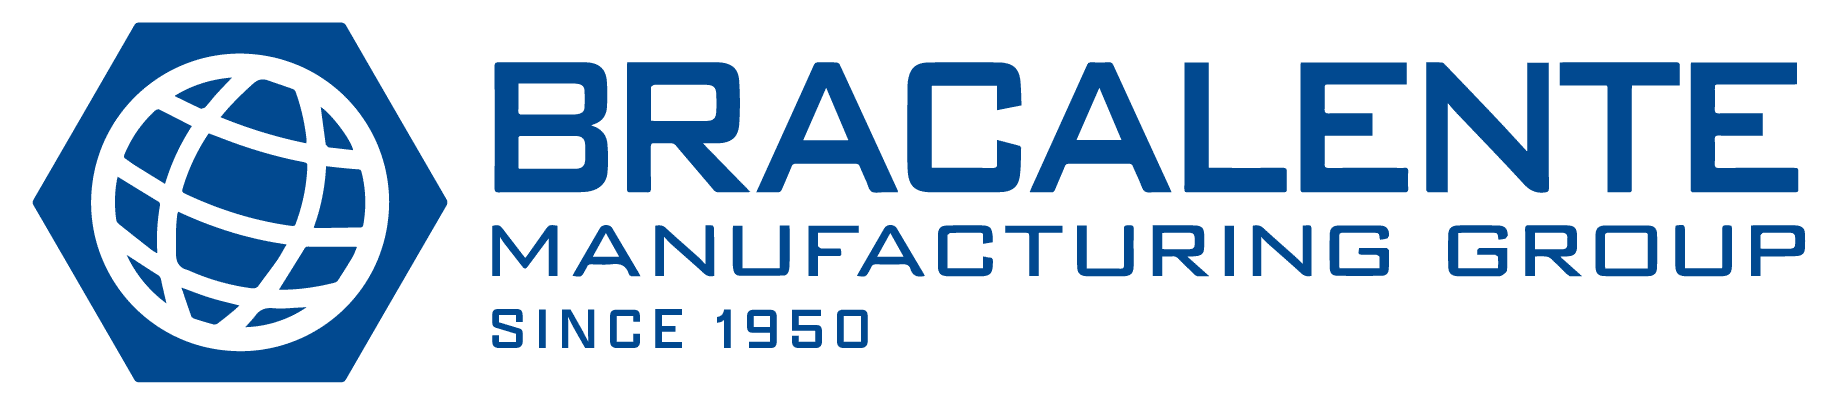 Bracalente Manufacturing Group since 1950